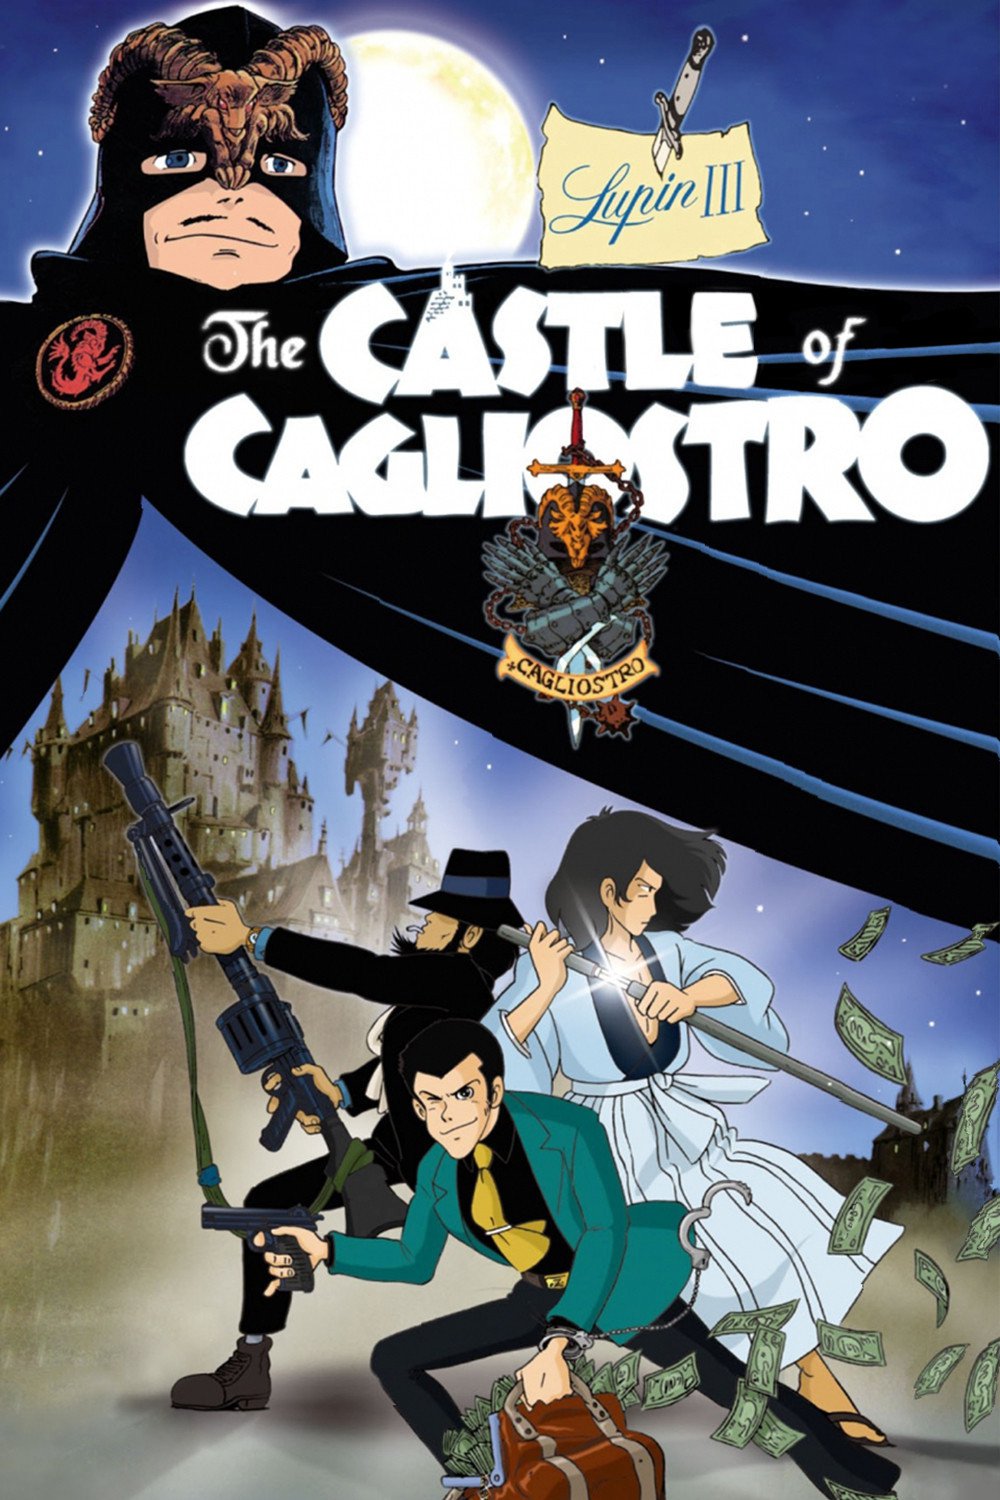 Lupin The Third The Castle Of Cagliostro 1979 Full Movie Online In Hd Quality